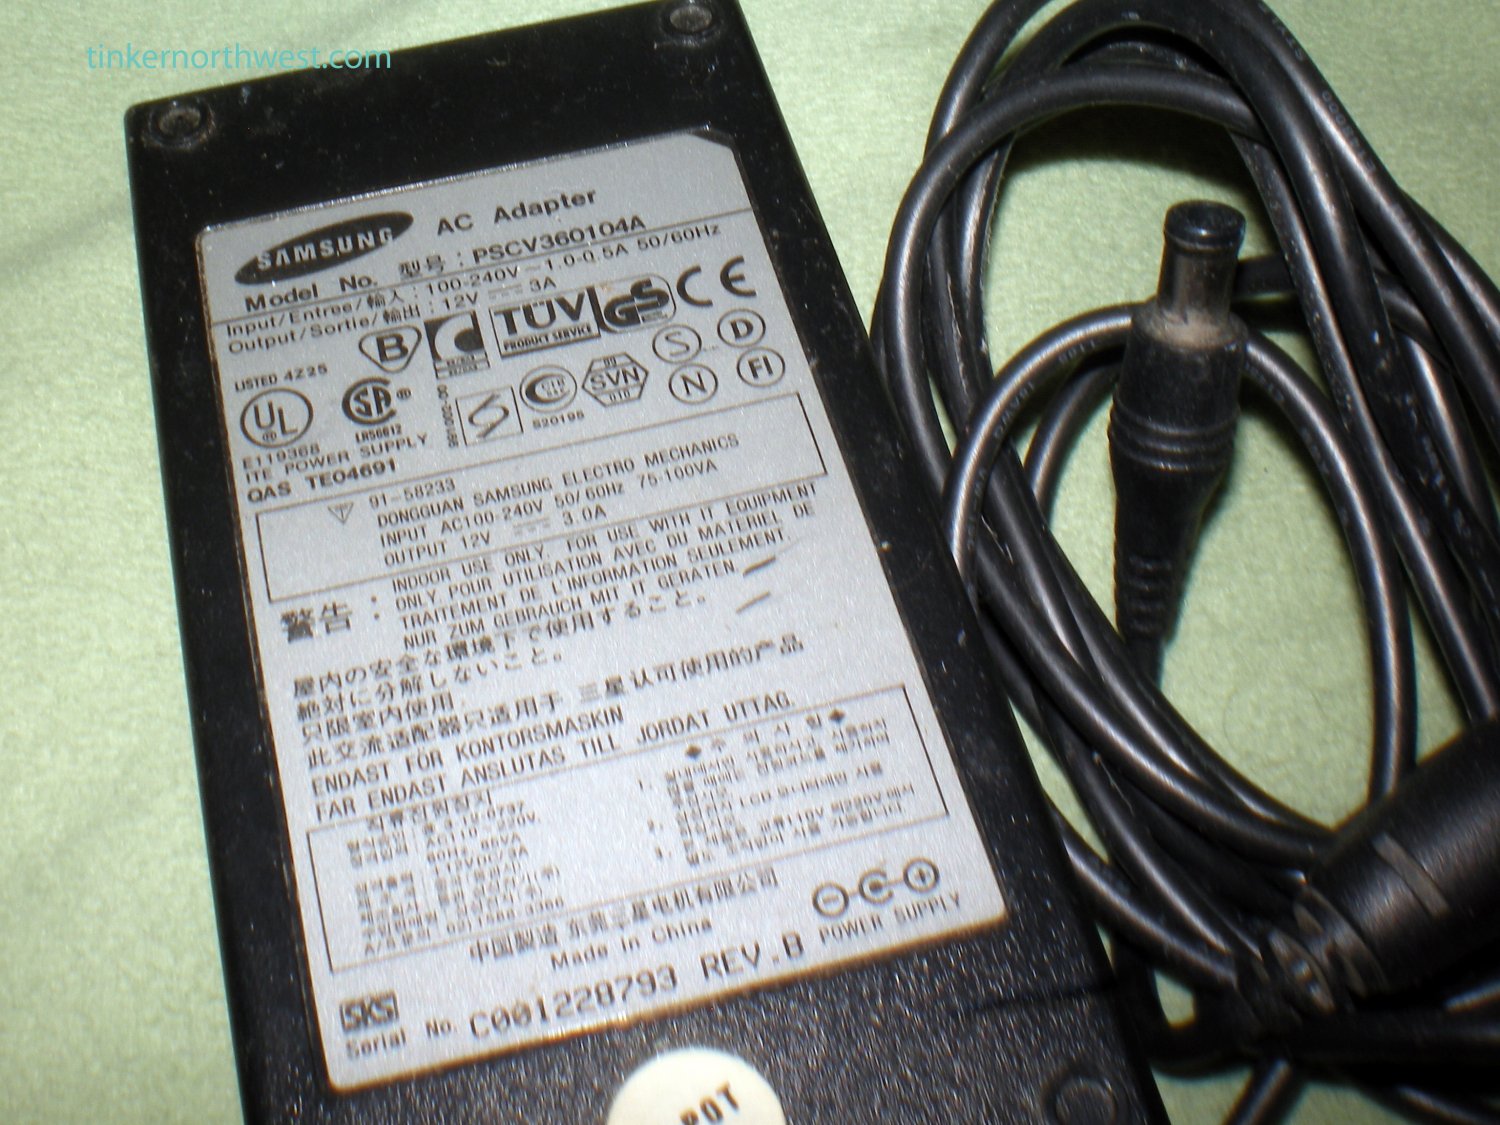 Samsung PSCV360104A 12V LCD Monitor AC Power Adapter Supply for AD-3612S SAD03612A-UV